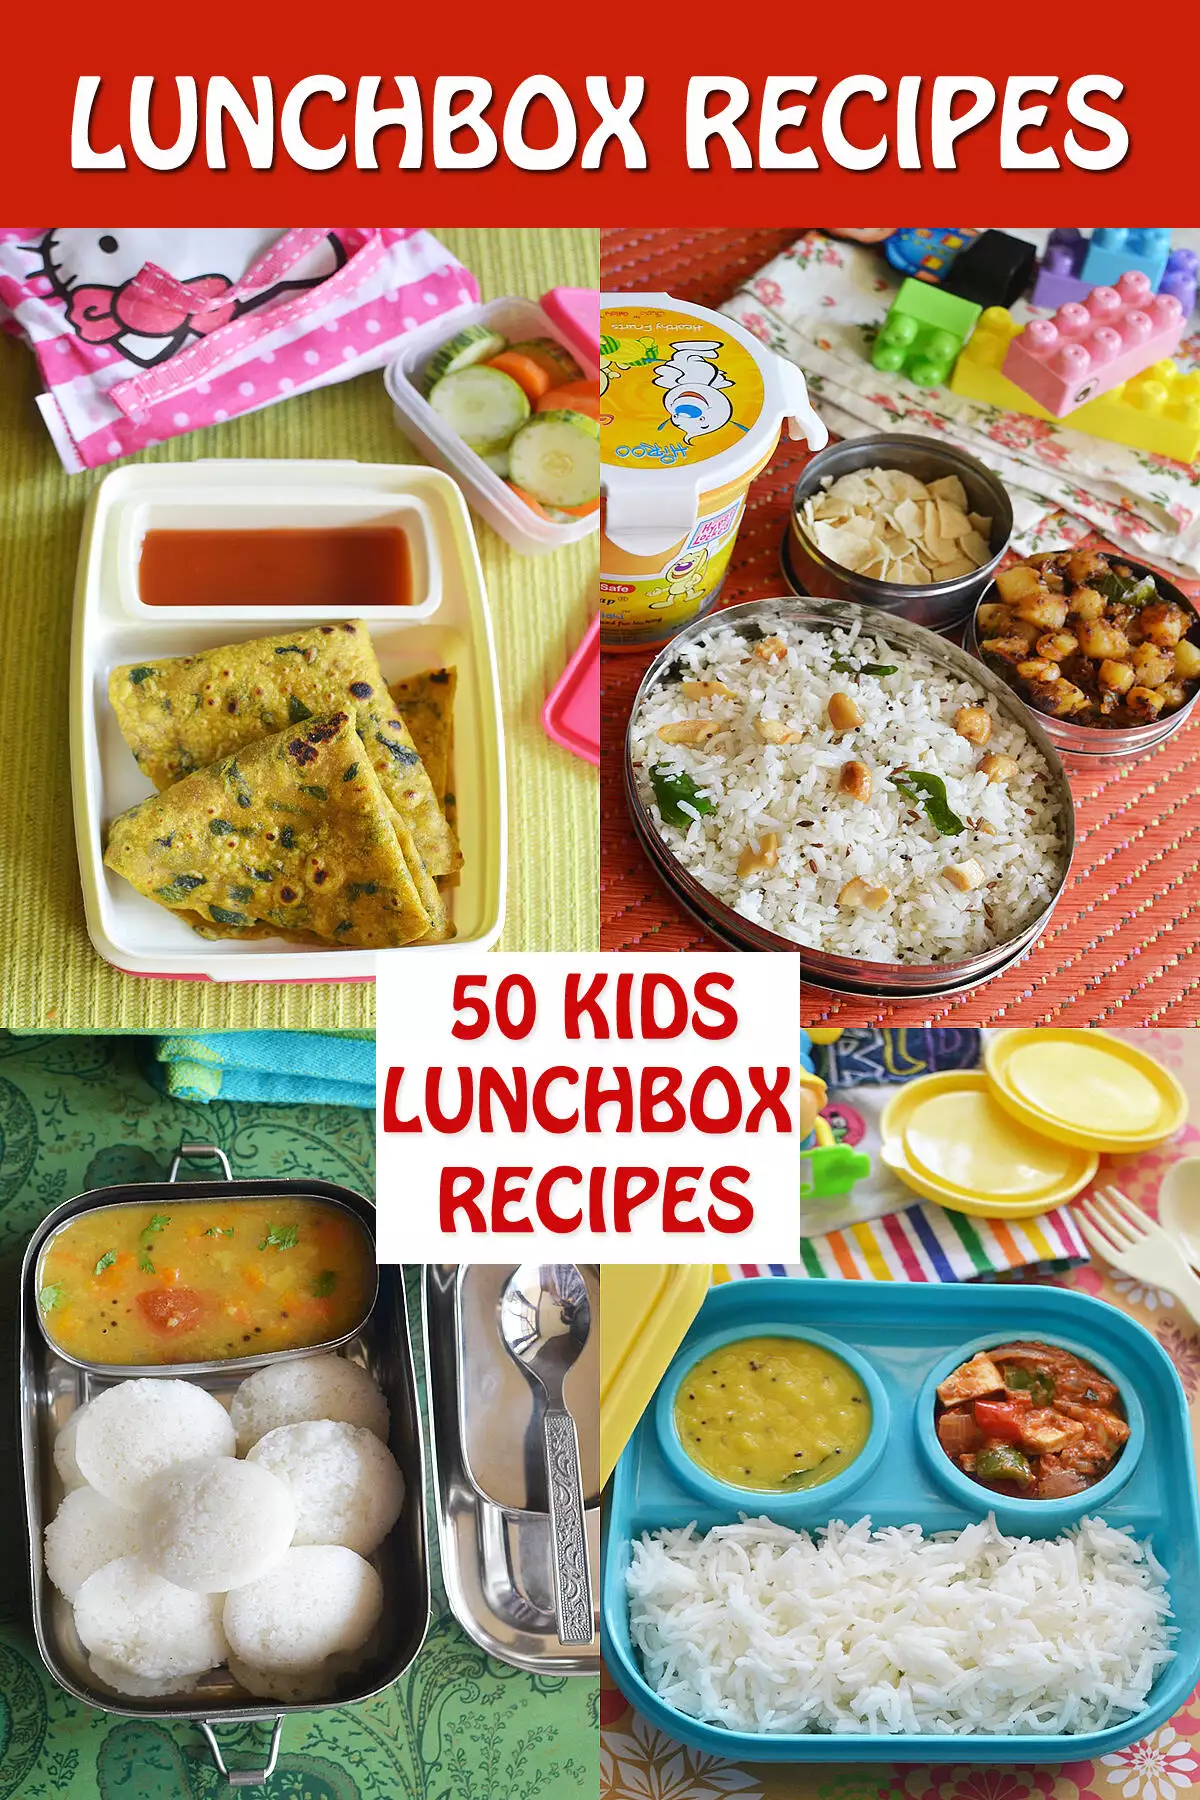 Monday 2 Saturday Lunch Box Meal Recipes in 30 Mins